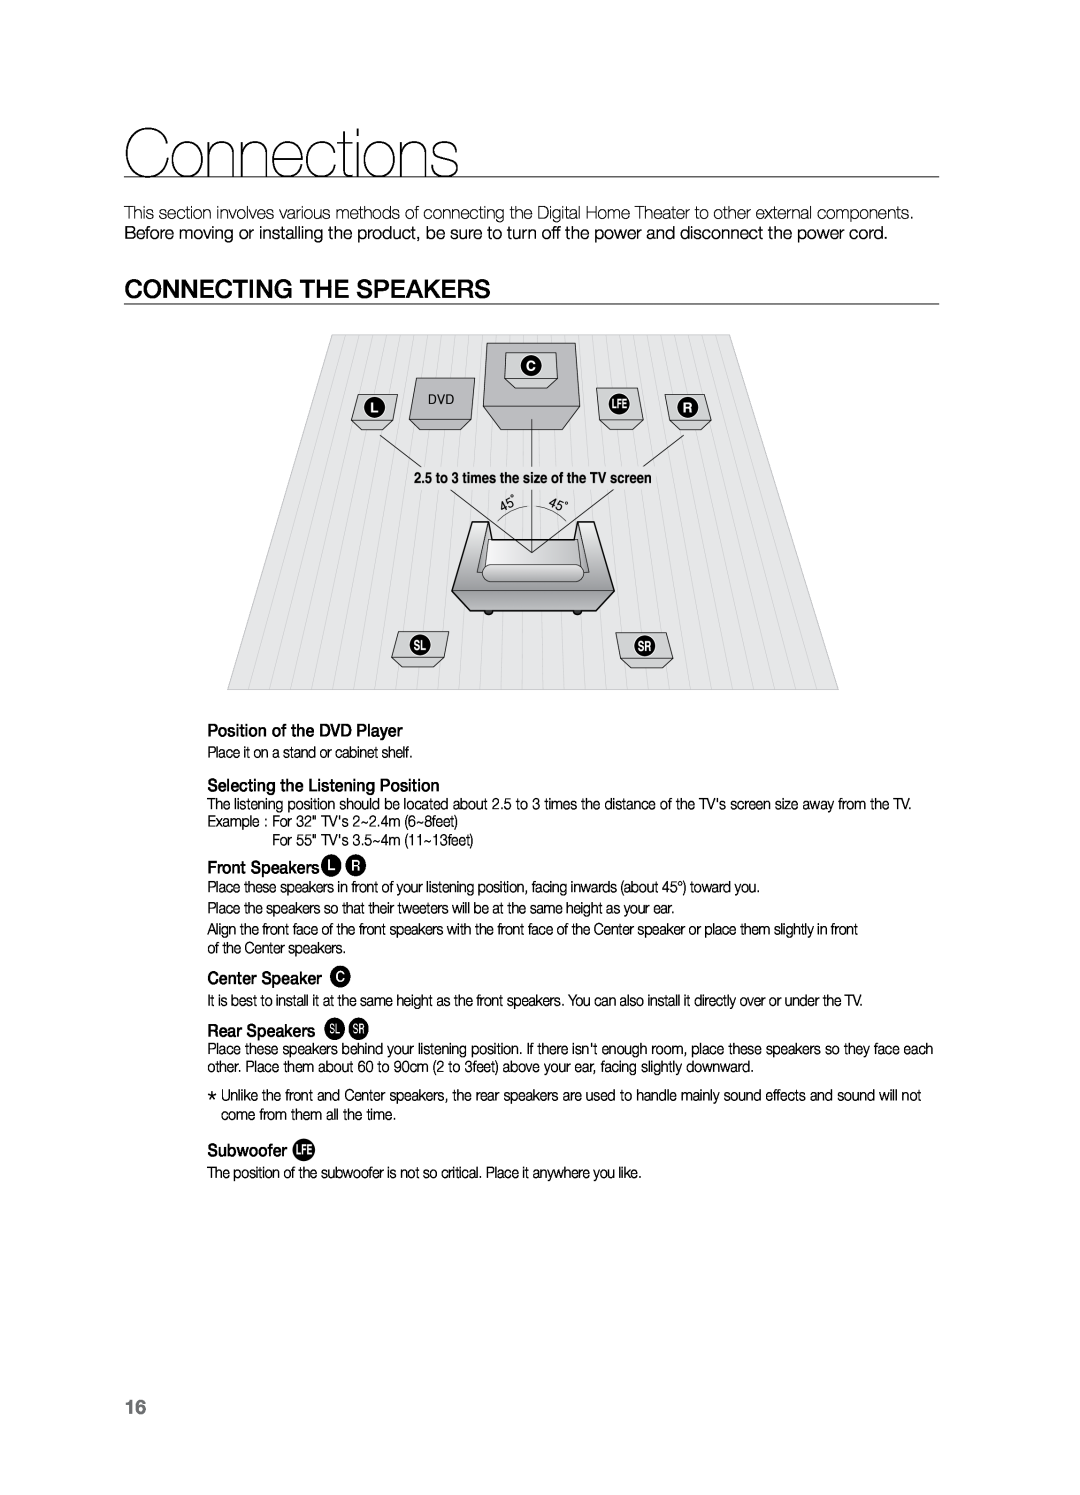 Samsung HT-Z221 user manual Connections, Connecting the Speakers 